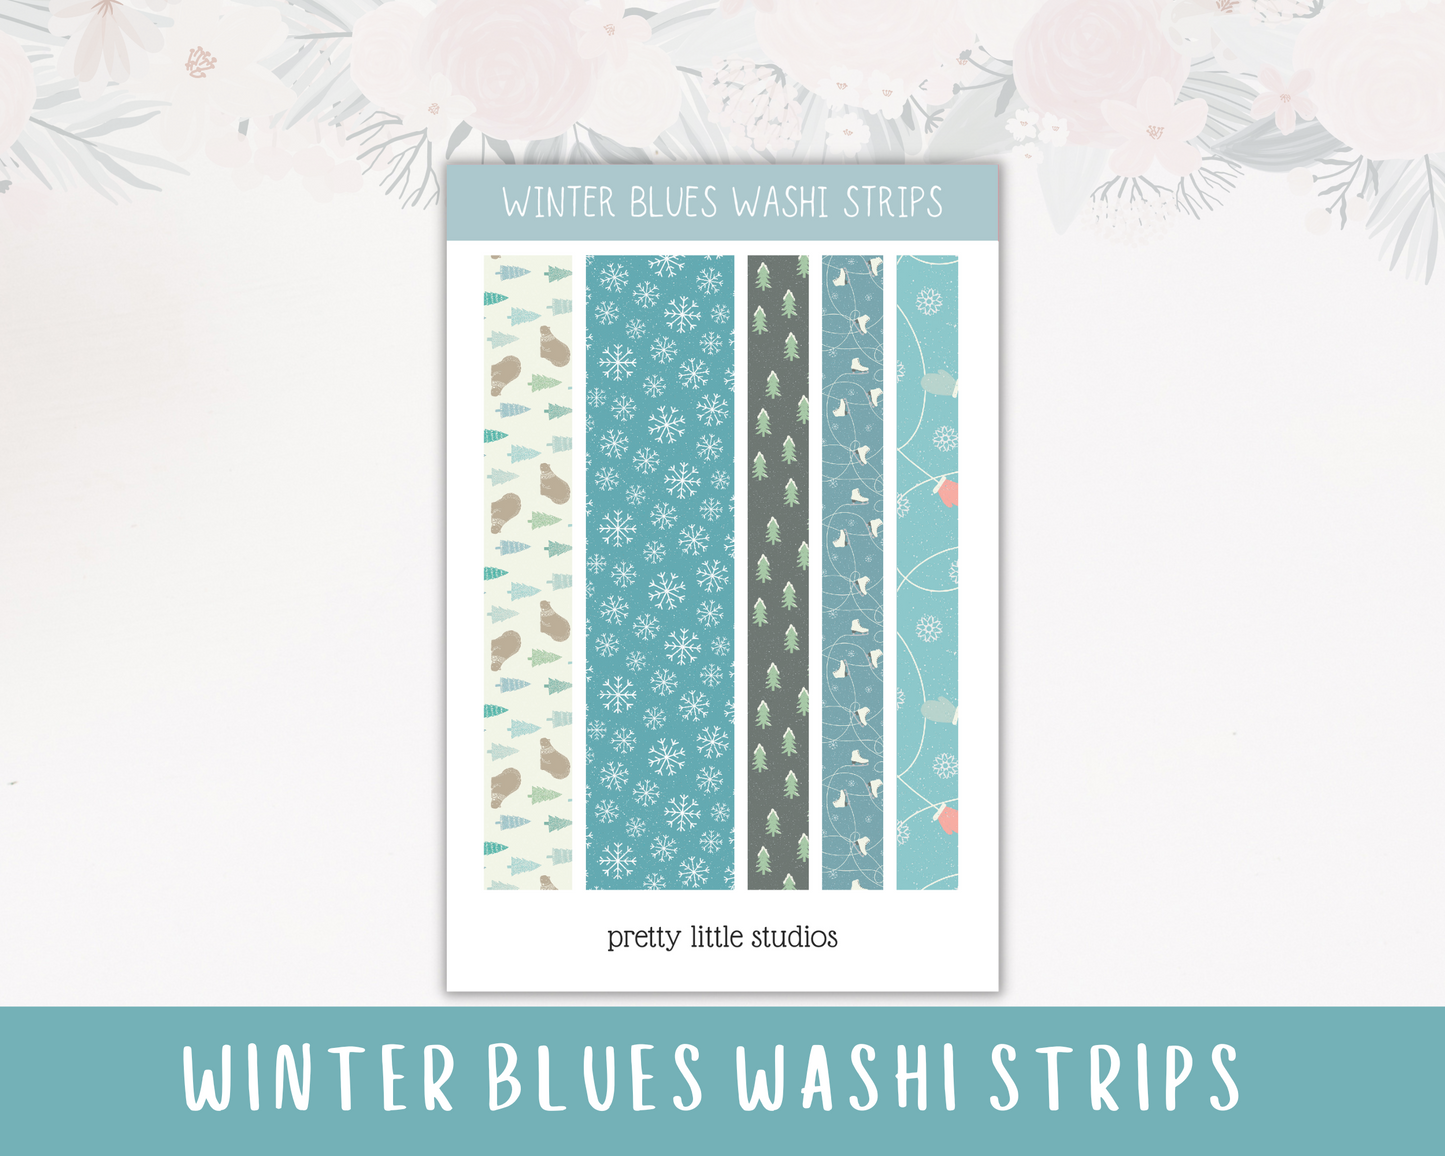 Winter Blues Washi Strip Aesthetic Stickers - Bullet Journal Stickers - Planner Stickers - Winter Stickers - Winter Washi Strip Stickers